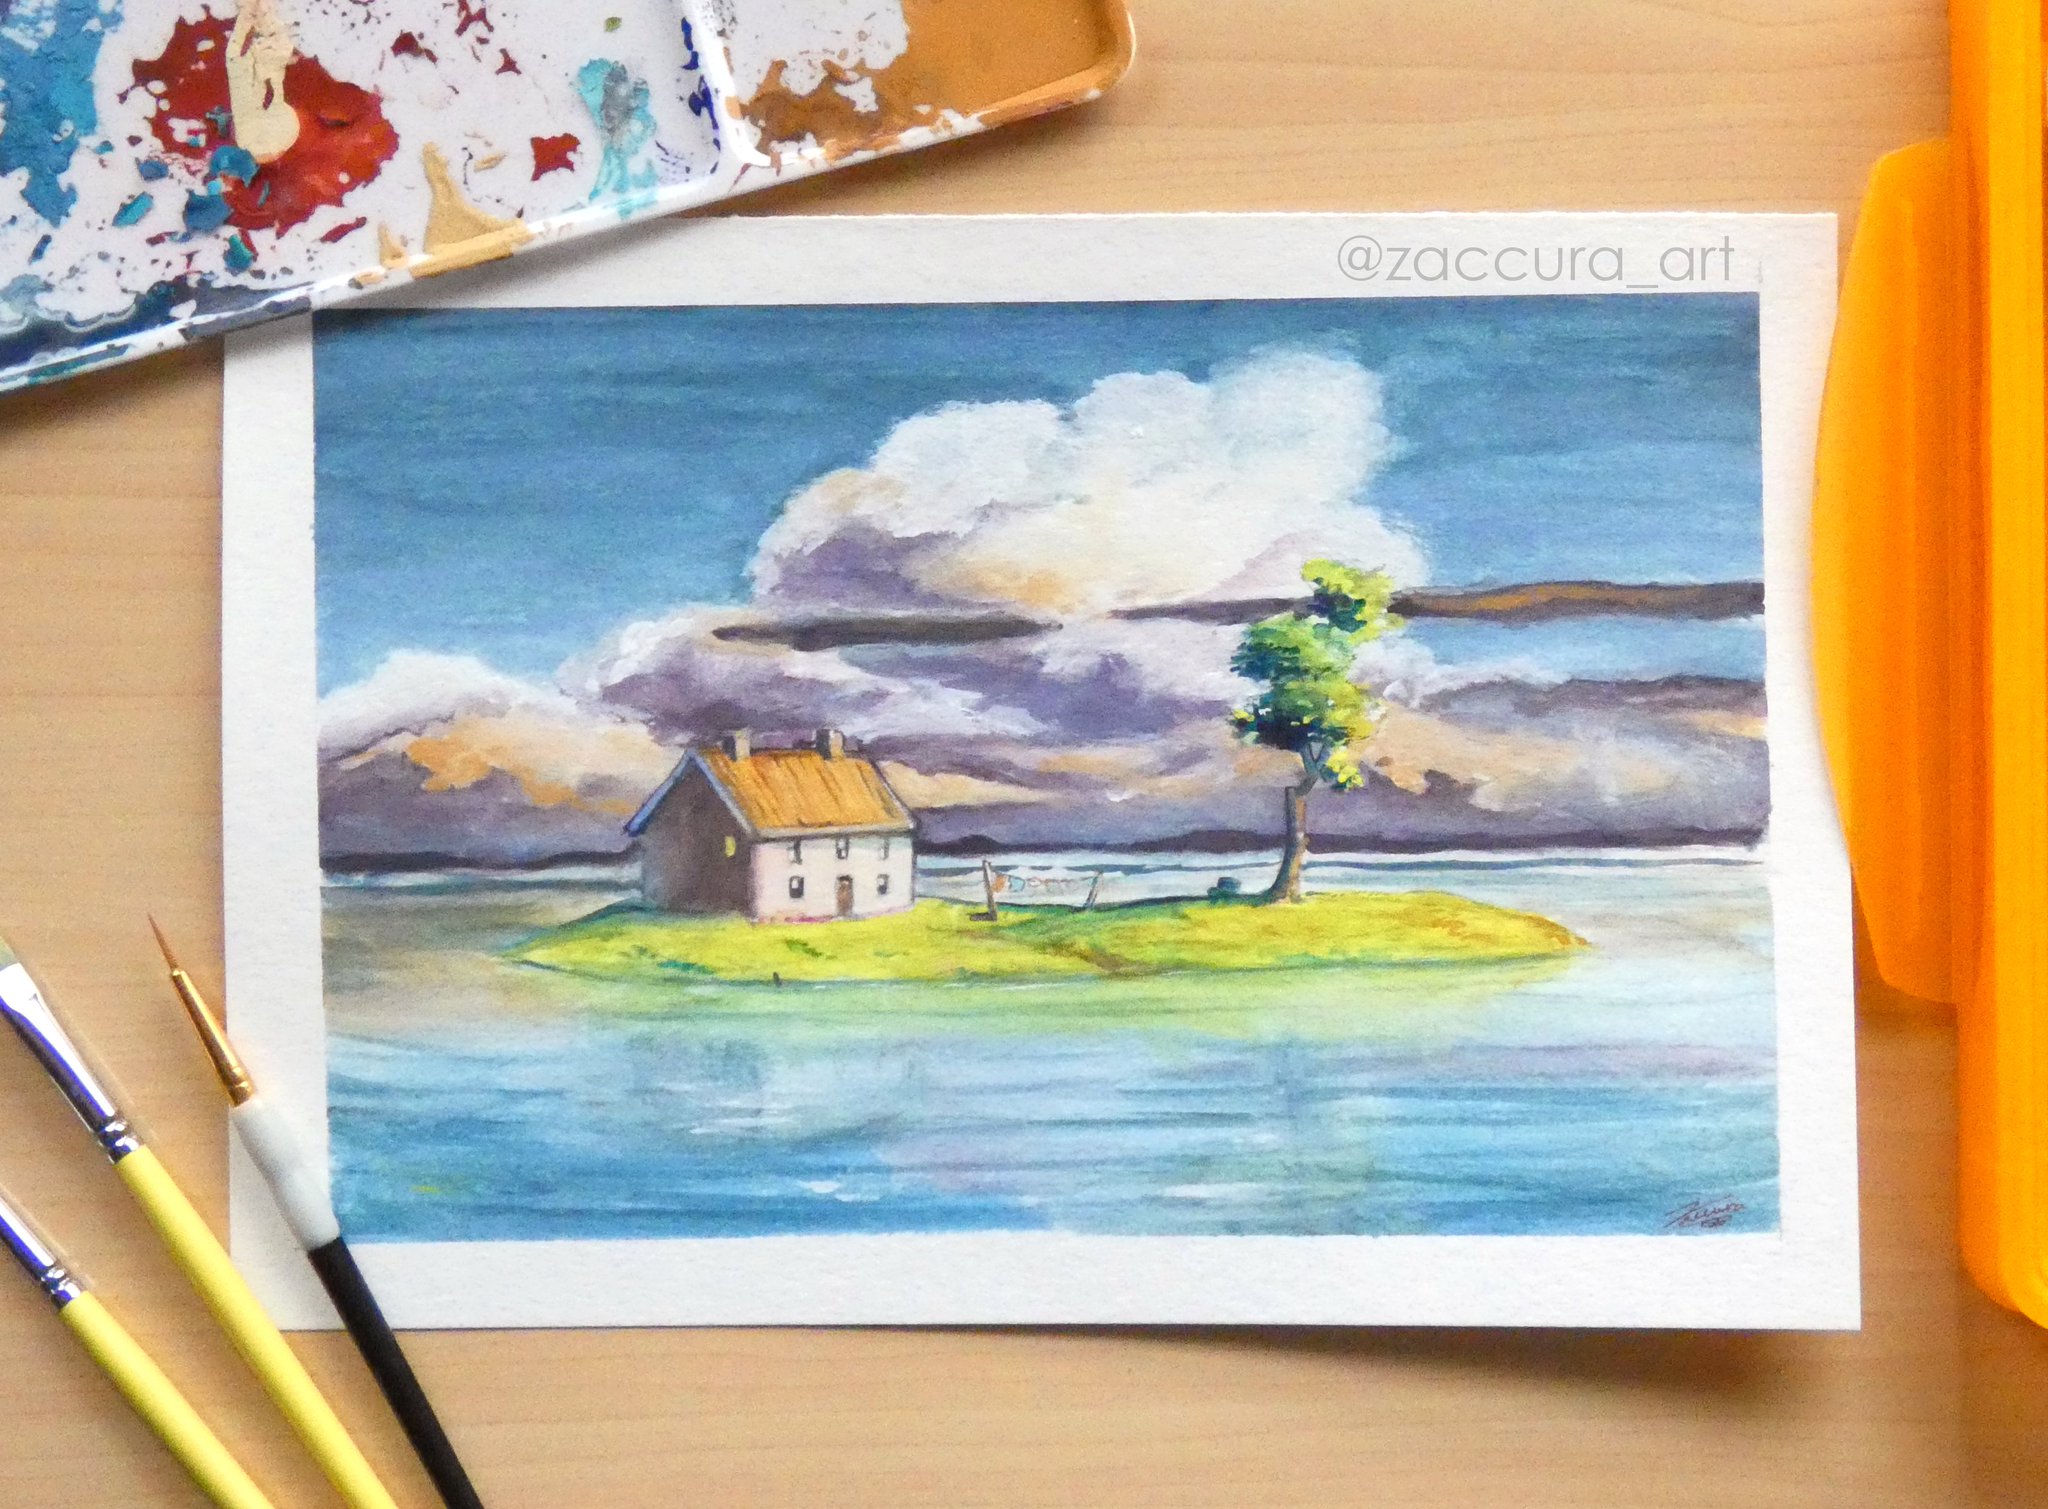 Đàm Thị Mỹ Lệ on Instagram: a scene form Spirited Away Nicker poster color  on Doreart Sketchbook . . . . . . #paint #paintwithme #paintingvideo  #nickerpostercolour #ghibli #landscapepainting #paintingoftheday  #chillvibes #inspired #